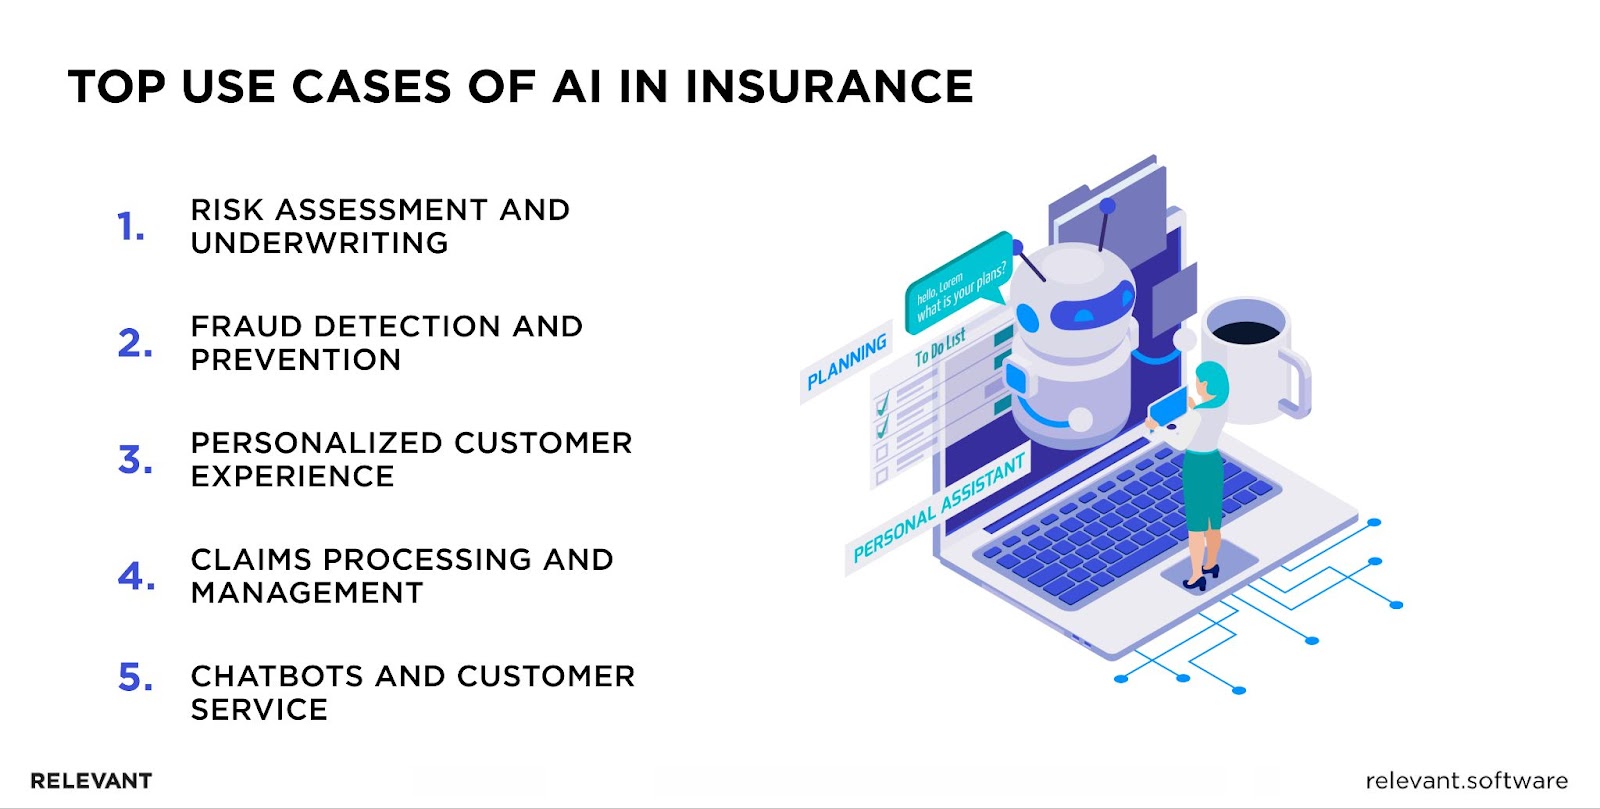 Key Applications of AI in Insurance